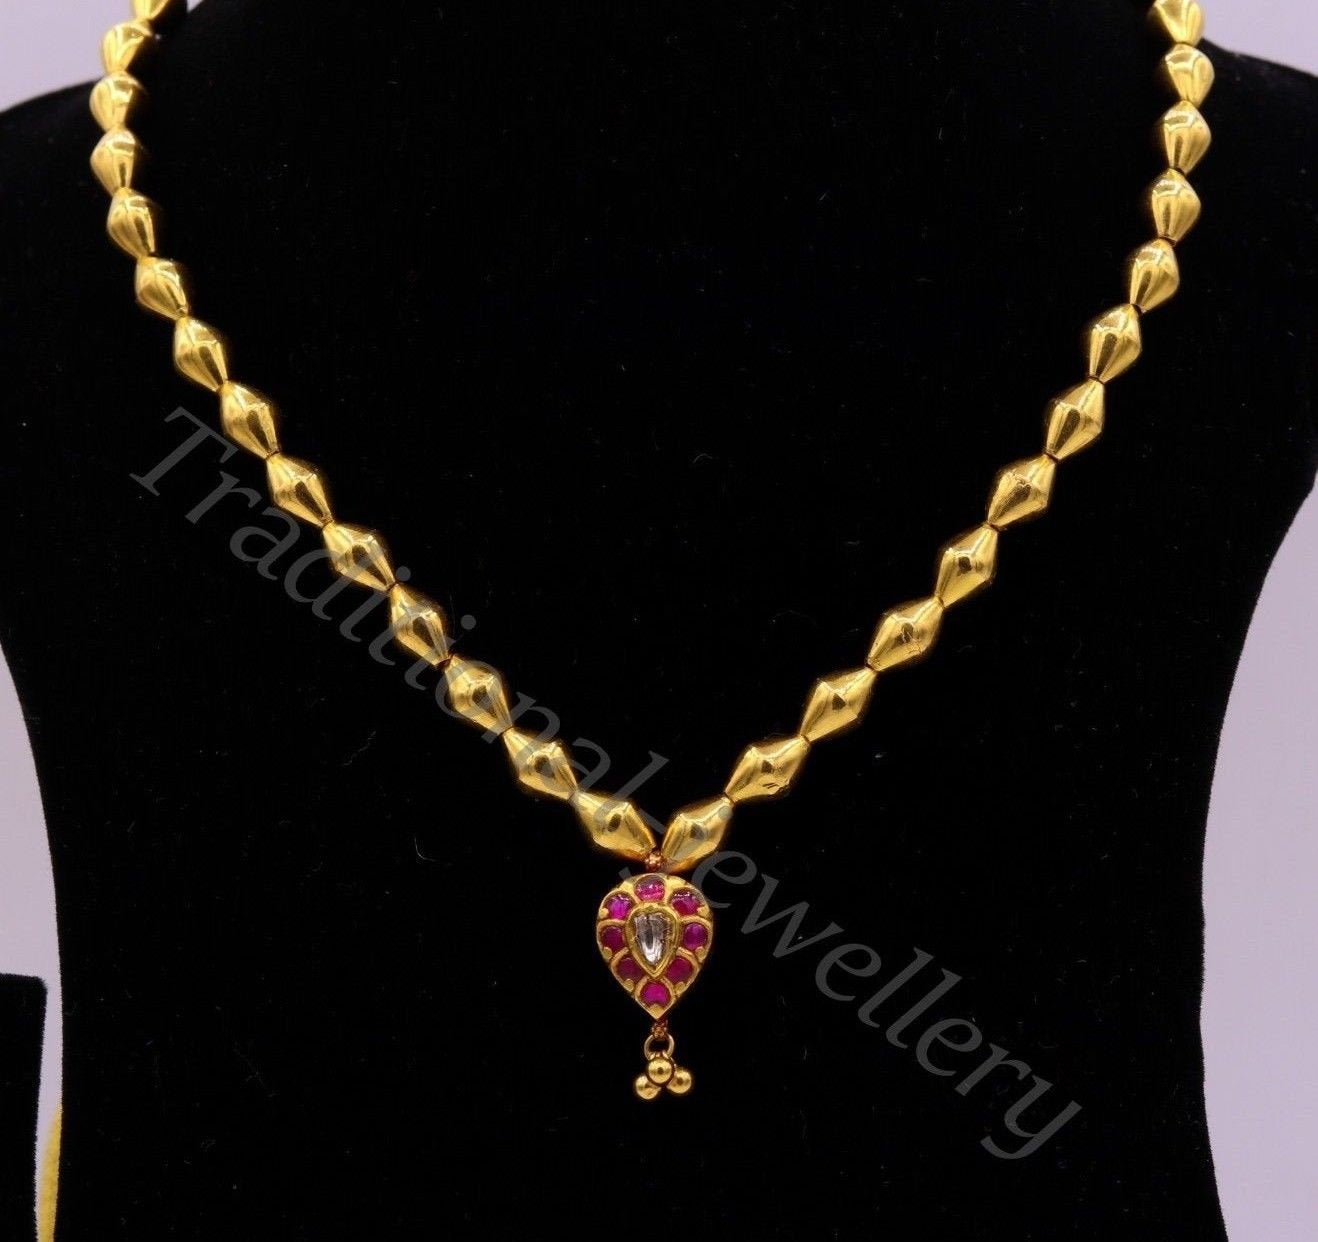 22k yellow gold handmade olive beads wax beads fabulous necklace pendant tribal jewelry from rajasthan india - TRIBAL ORNAMENTS